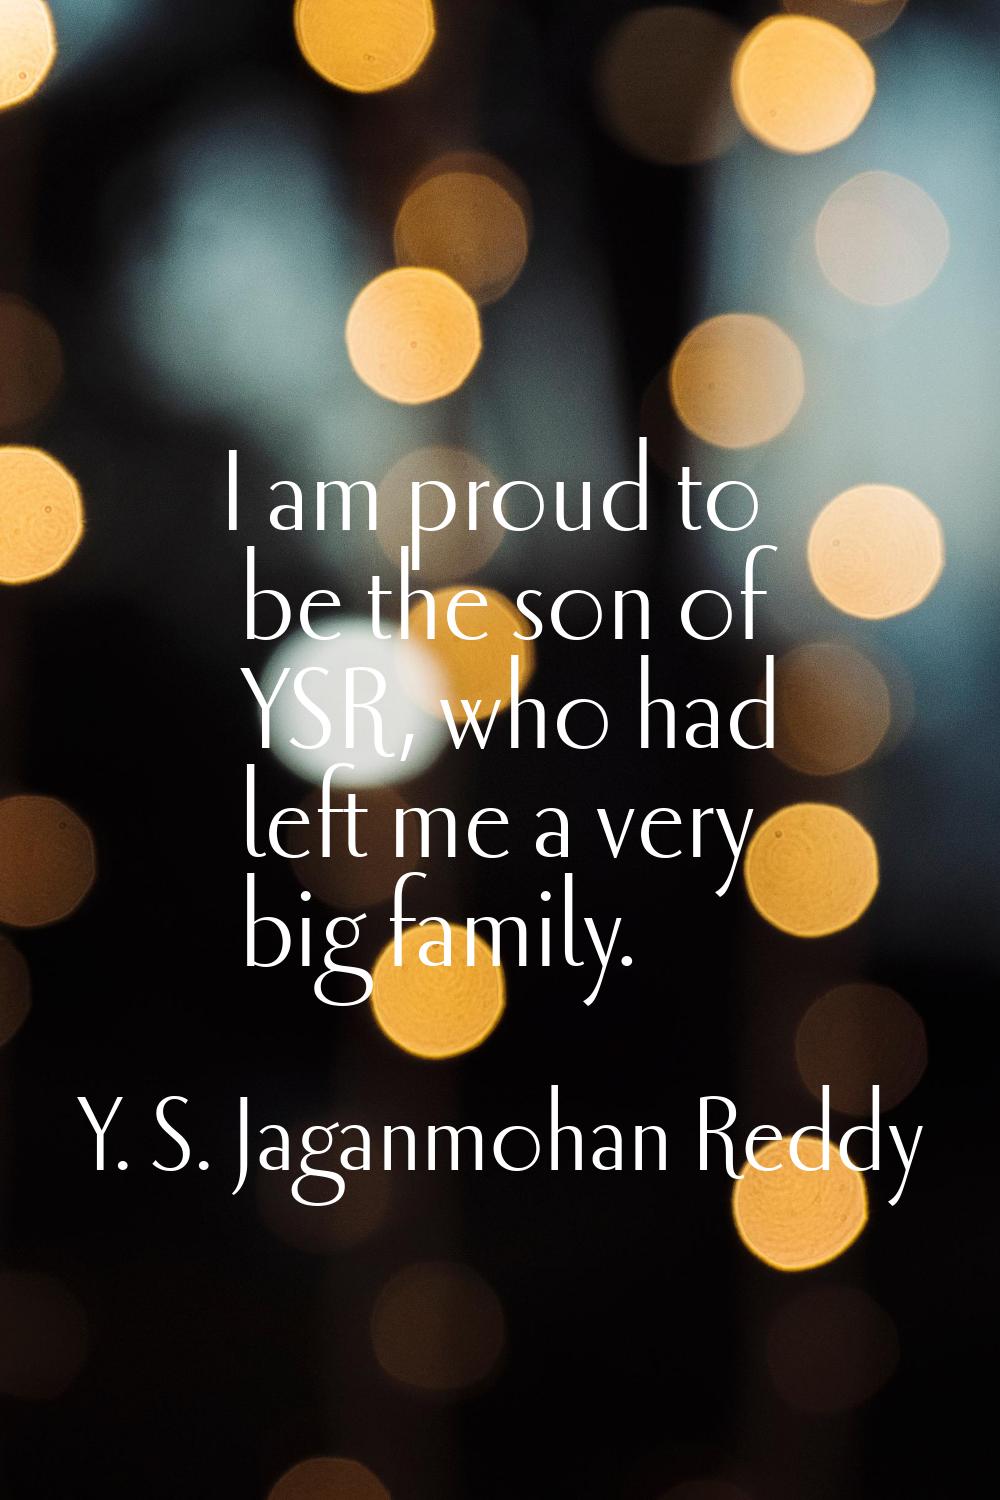 I am proud to be the son of YSR, who had left me a very big family.